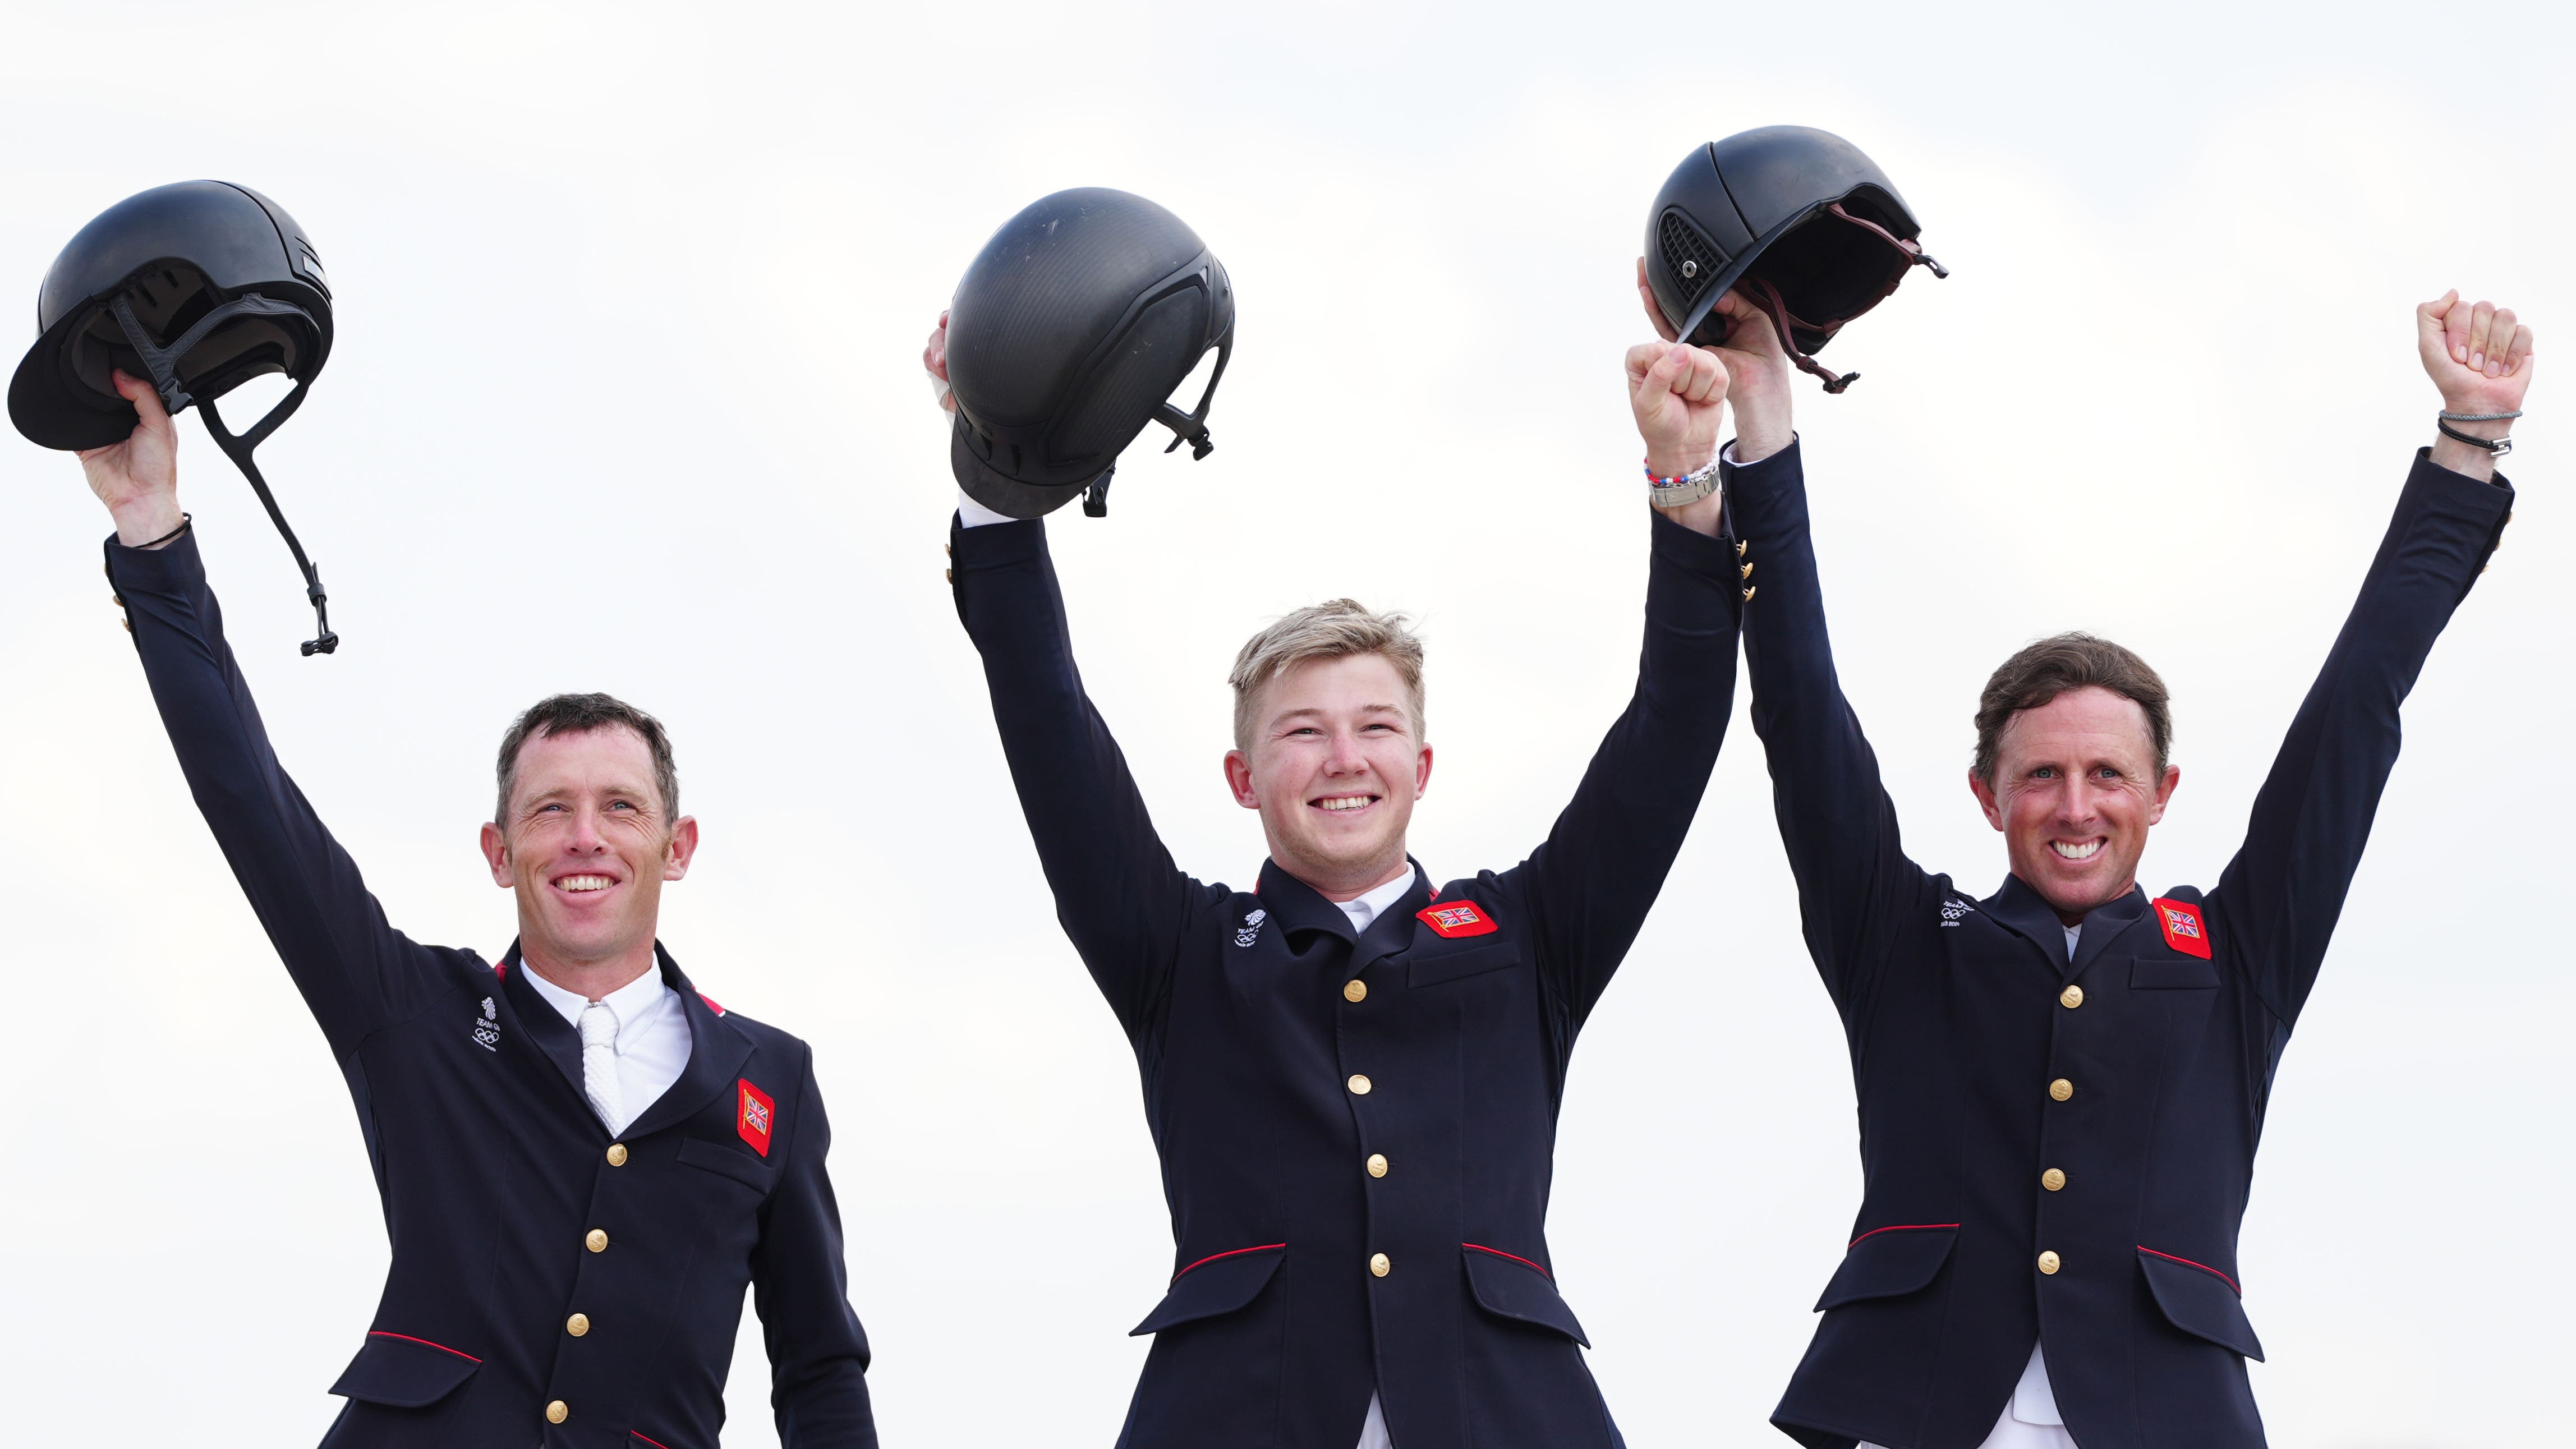 ‘Best day ever’ – sister celebrates Harry Charles’s jumping team gold